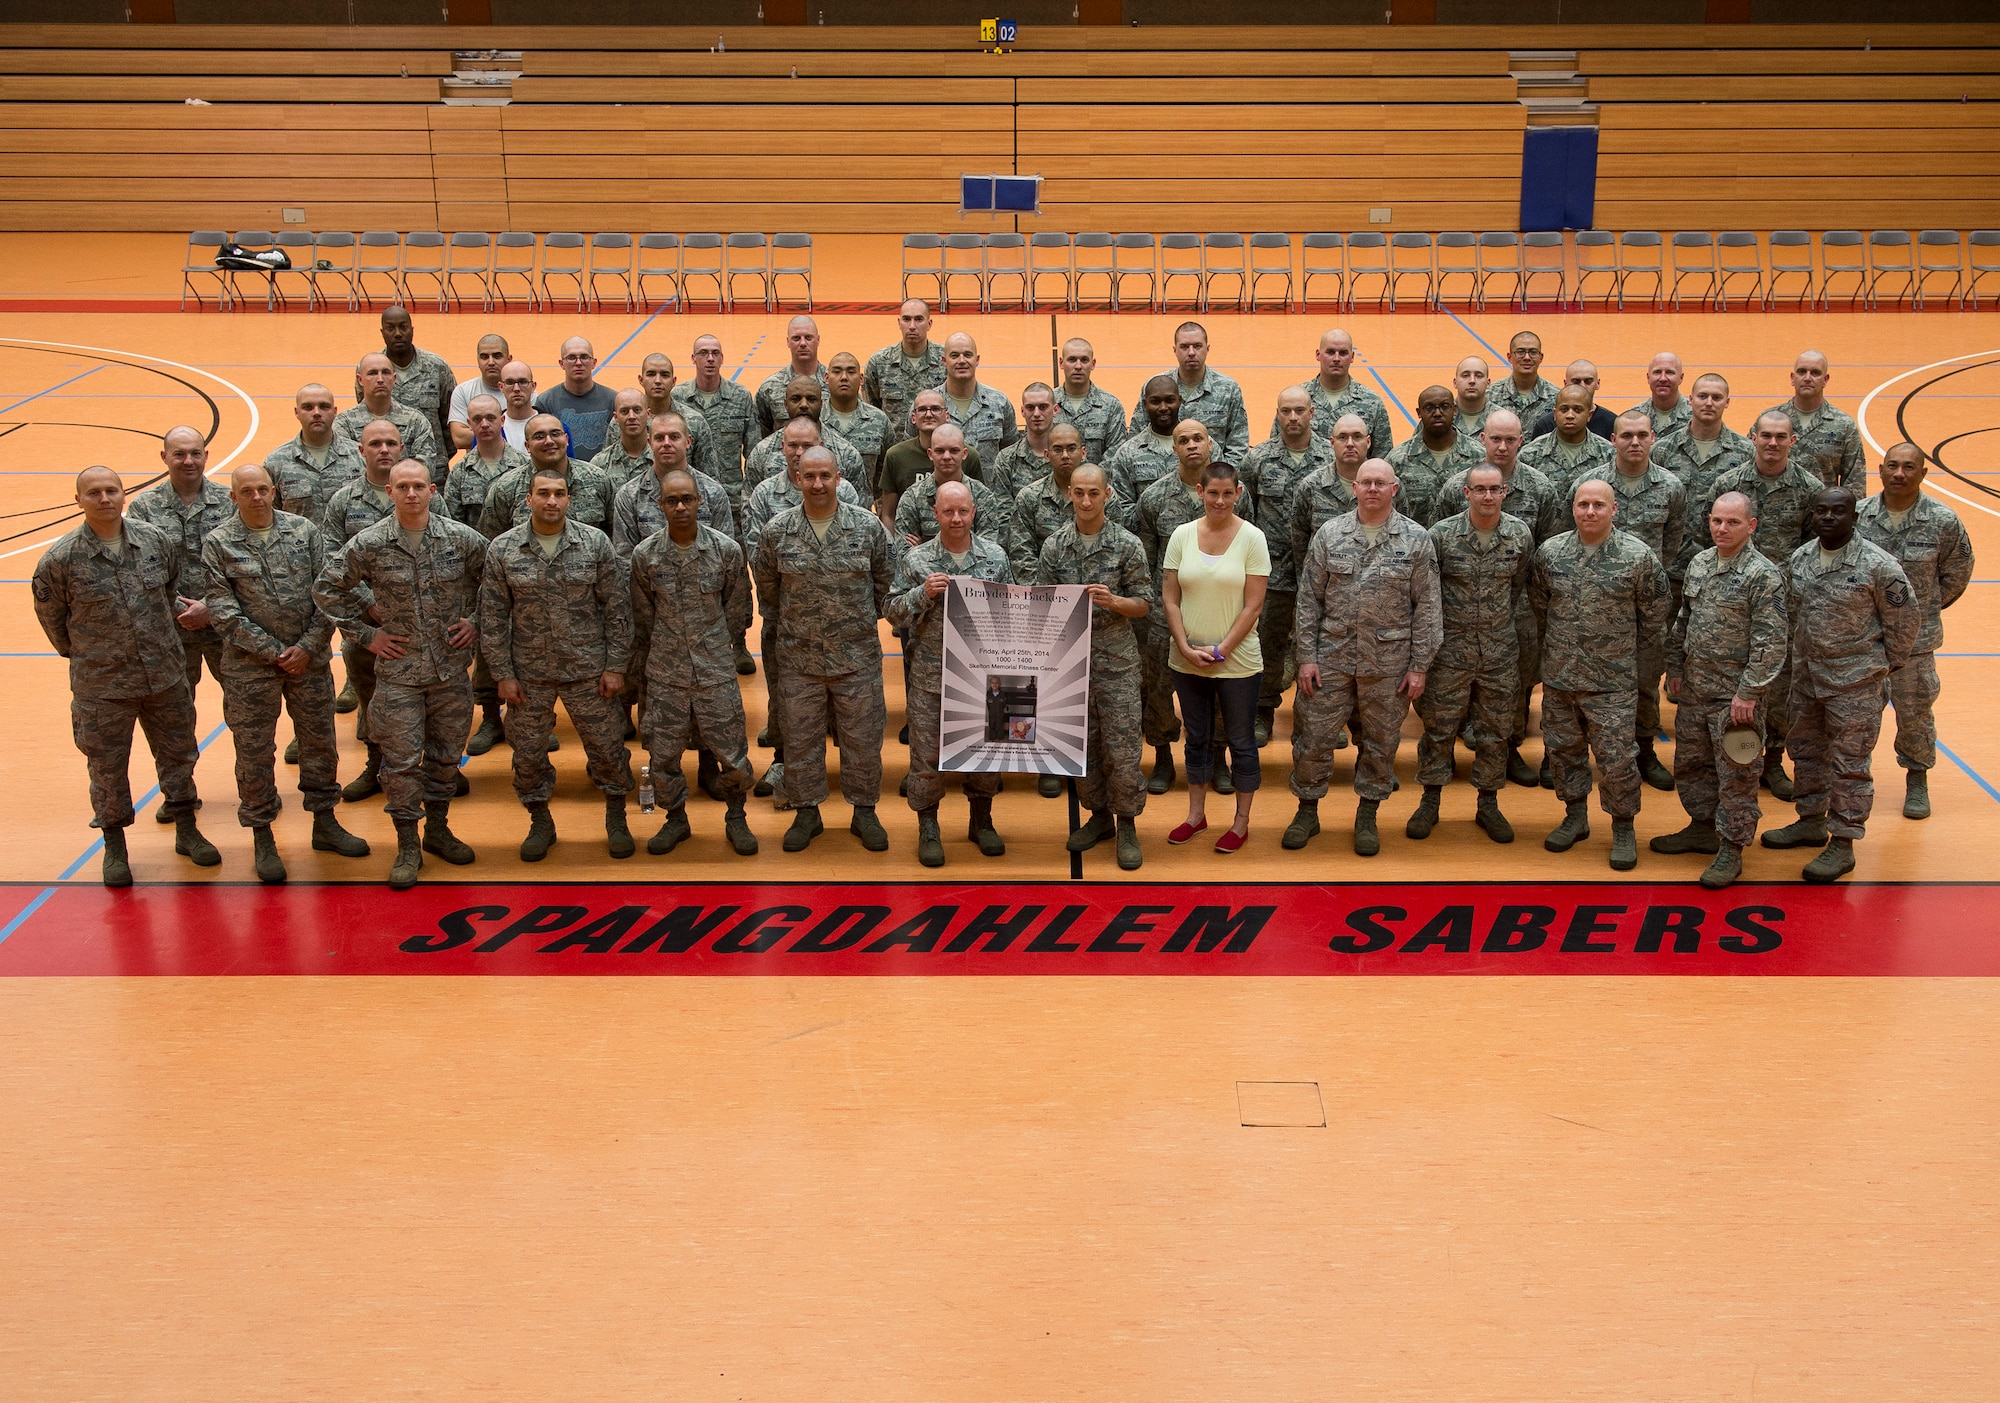 Participants in the “Go Bald for Brayden” event at Spangdahlem Air Base, Germany, pose for a group photo April 25, 2014, after shaving their heads to show support for Brayden Mitchell, 5, recently diagnosed with a form of kidney cancer. Spangdahlem Airmen donated approximately $5,000 and 120 Airmen shaved their heads. (U.S. Air Force photo by Staff Sgt. Chad Warren/Released)